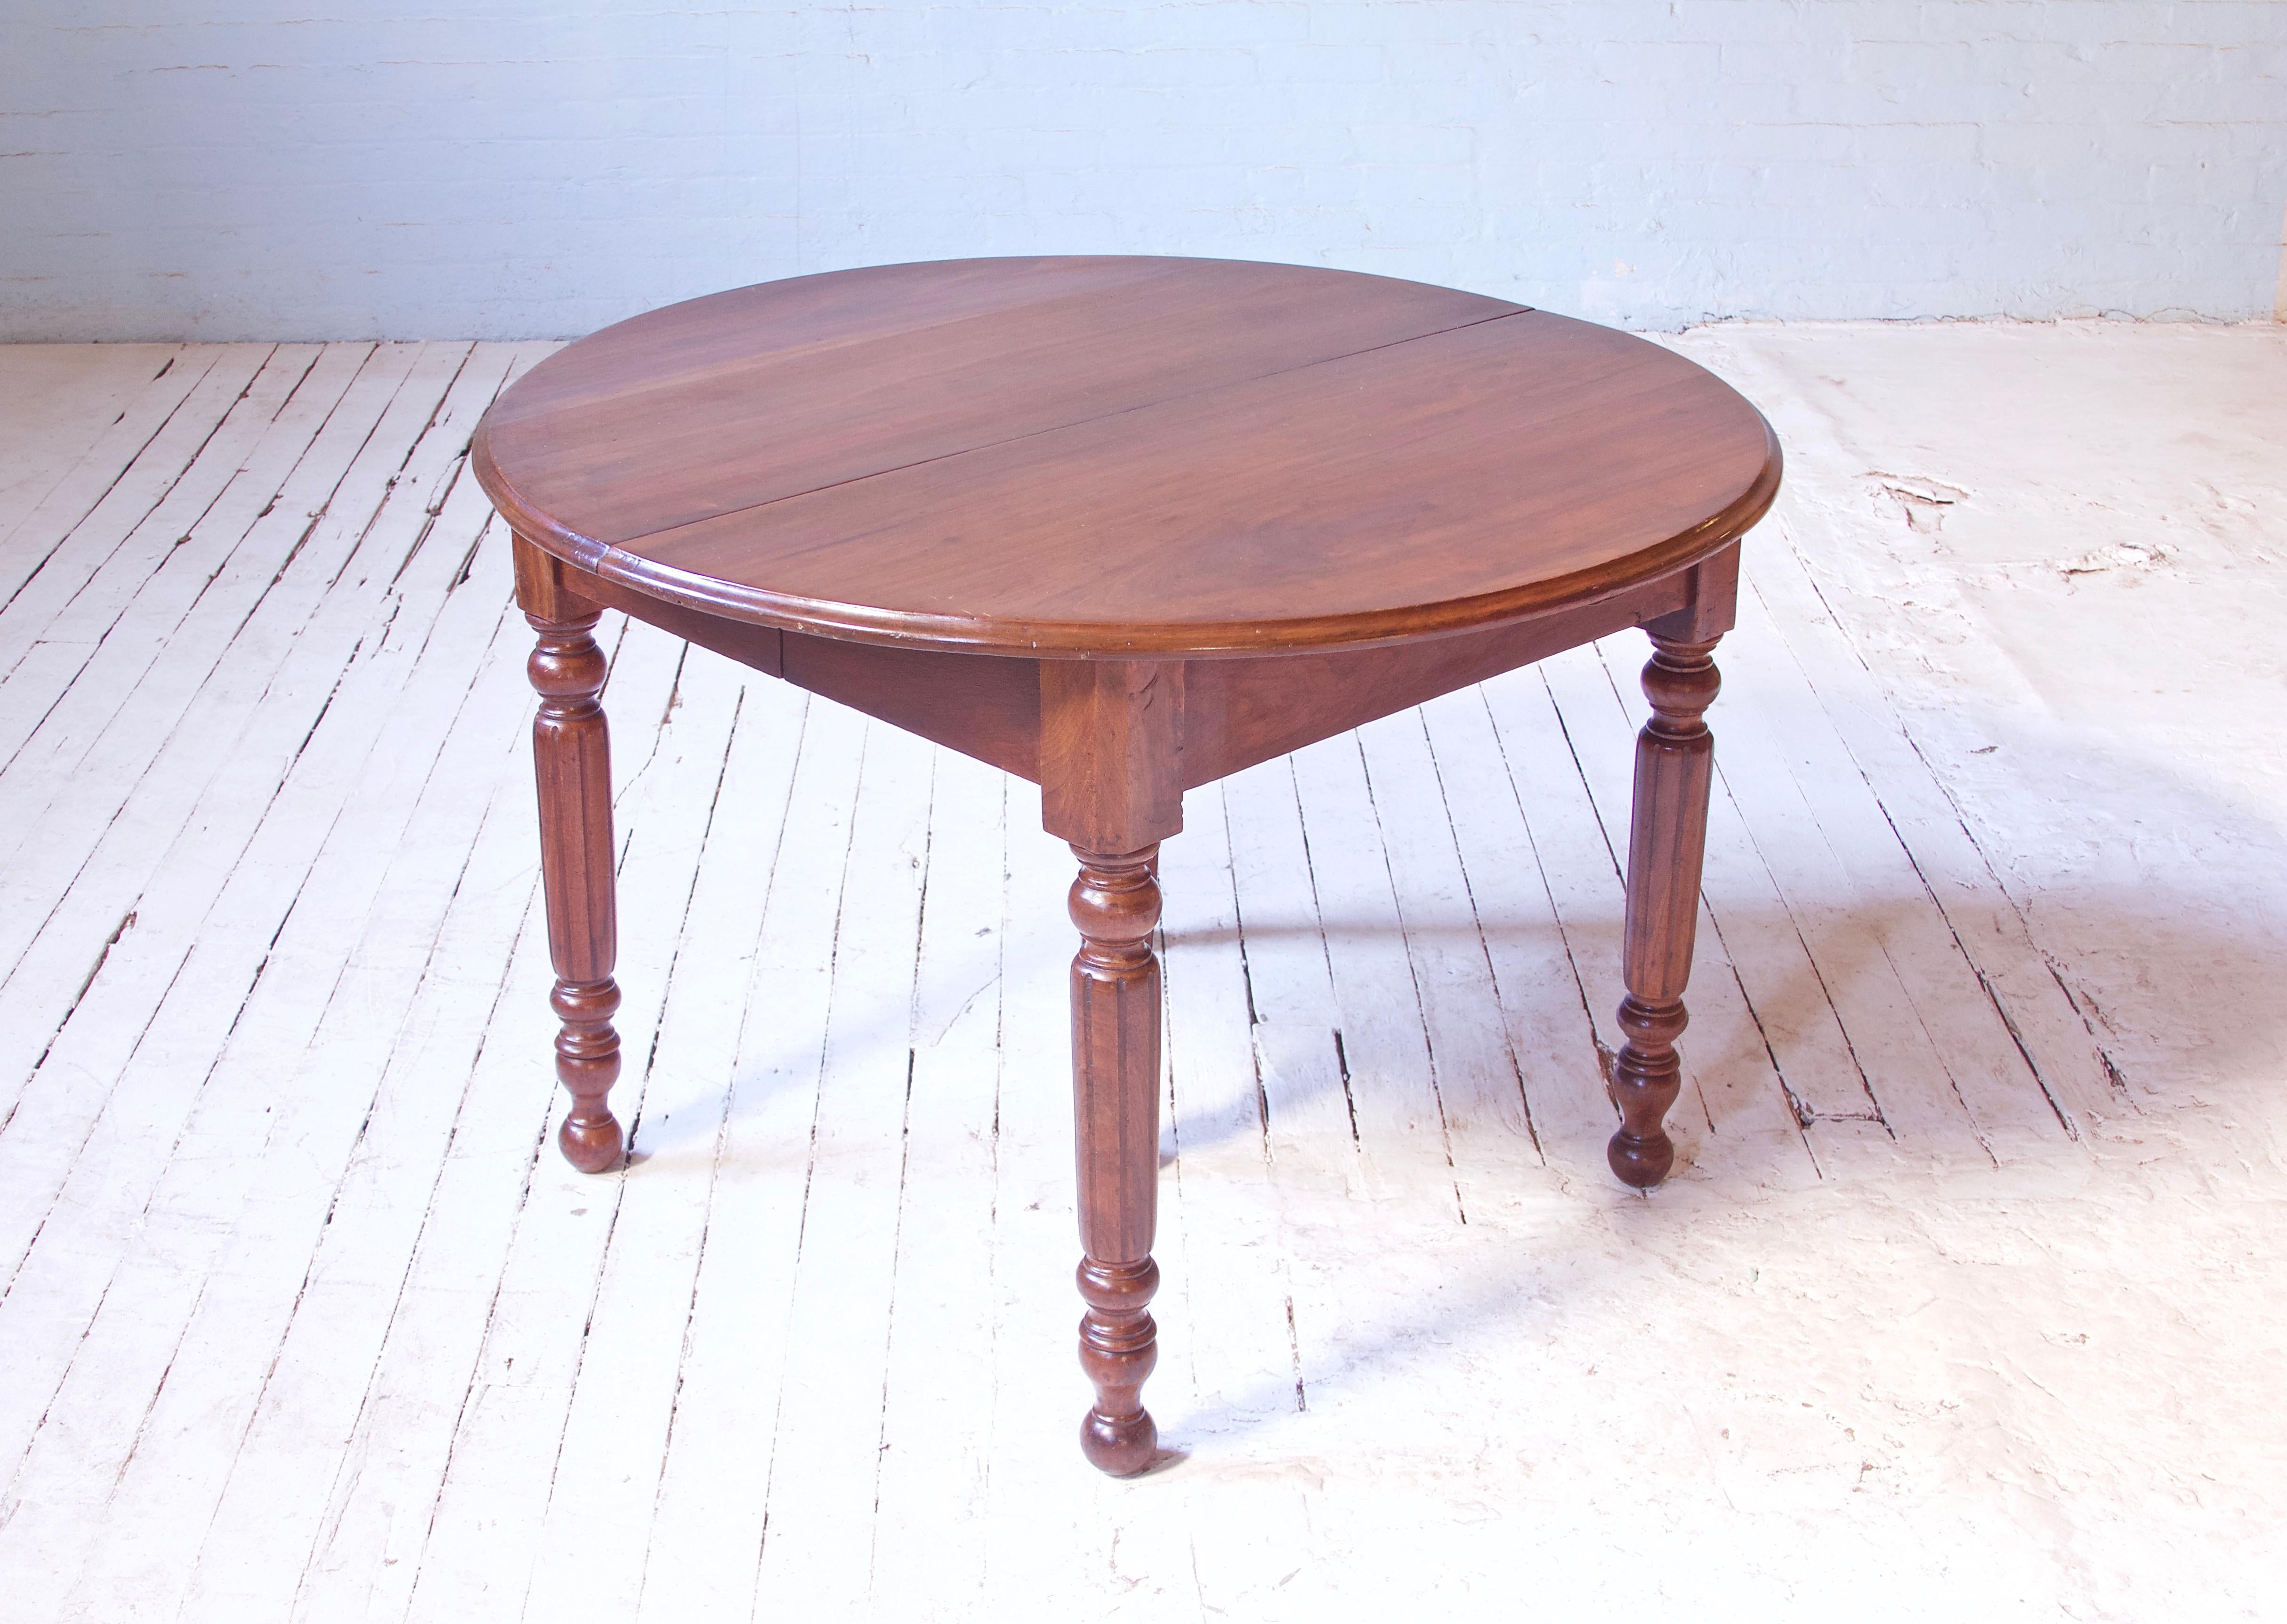 North American Antique Walnut 19th Century Extension Dining Table with Turned Legs, 1850s